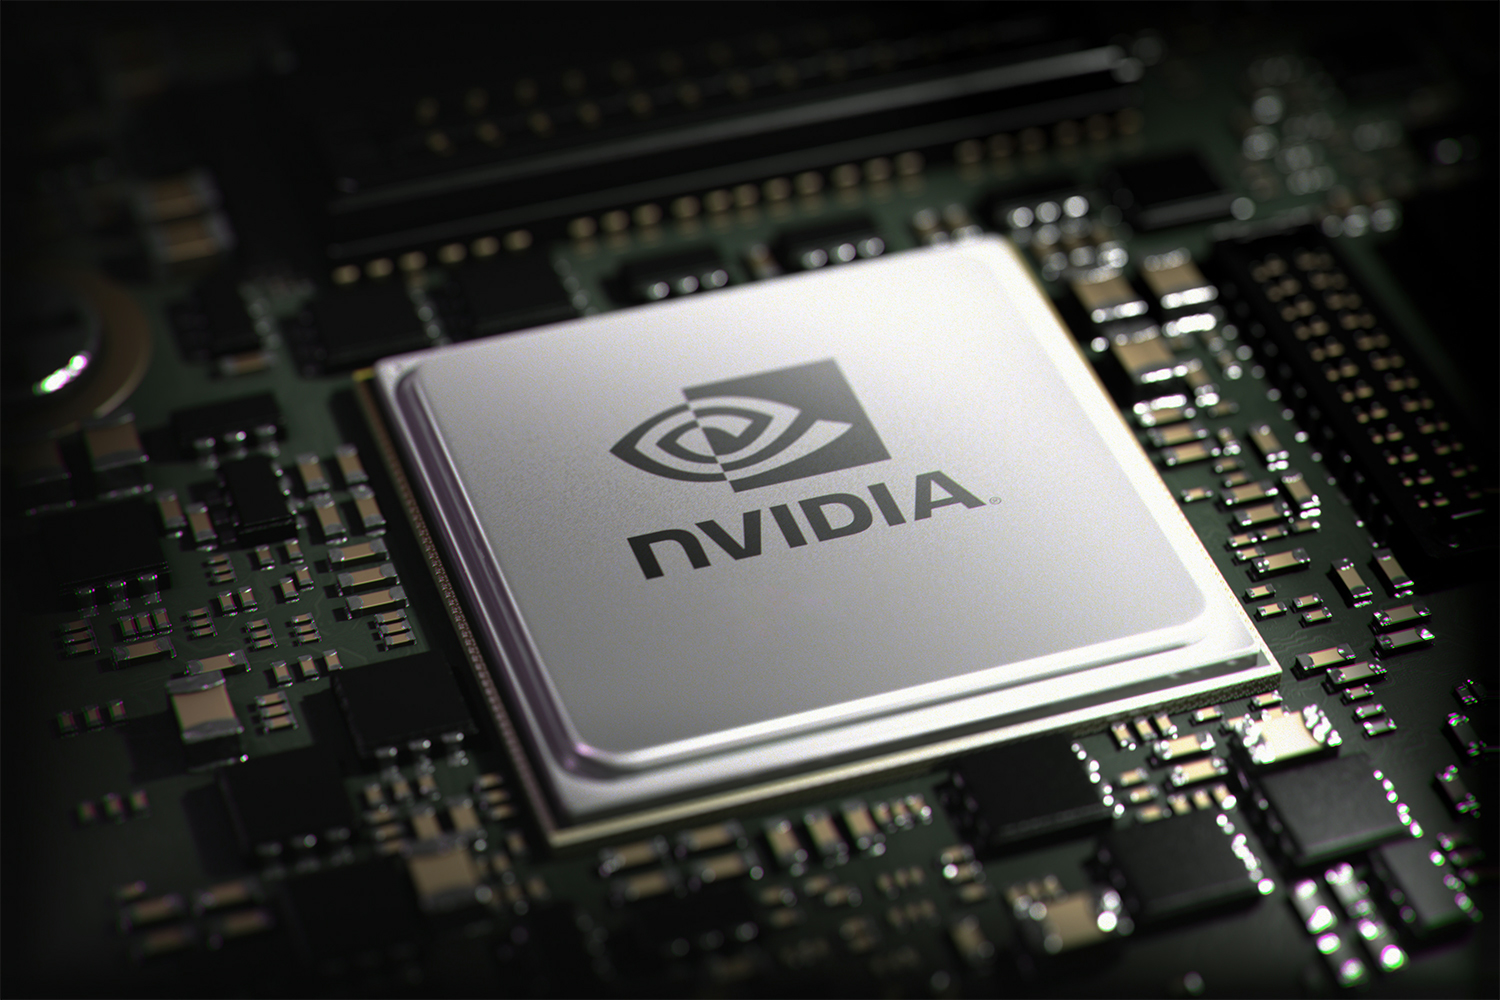 A chip with the Nvidia logo.